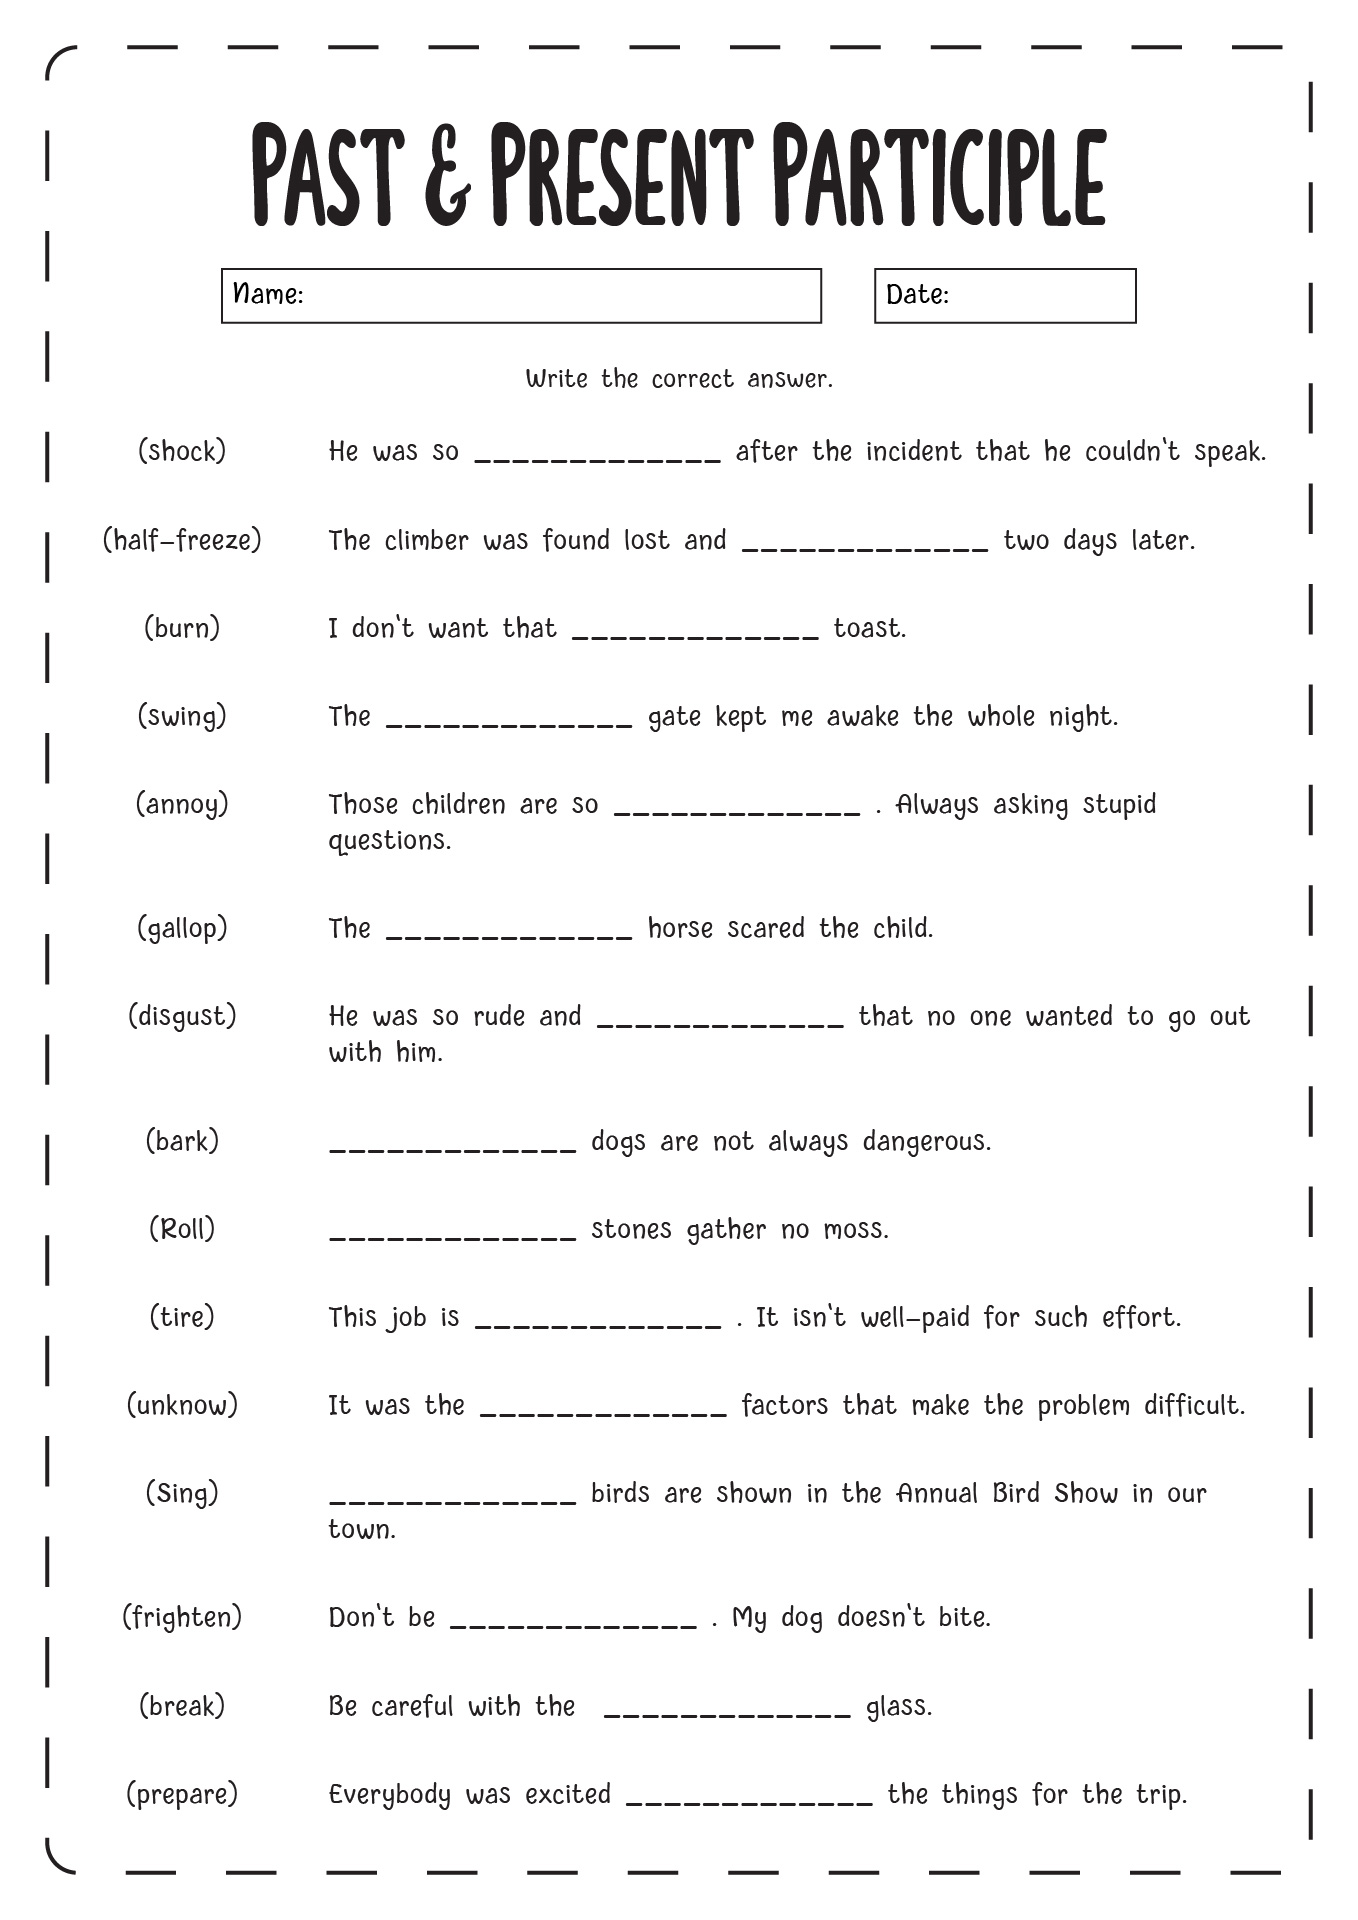 Past and Present Participle Worksheet